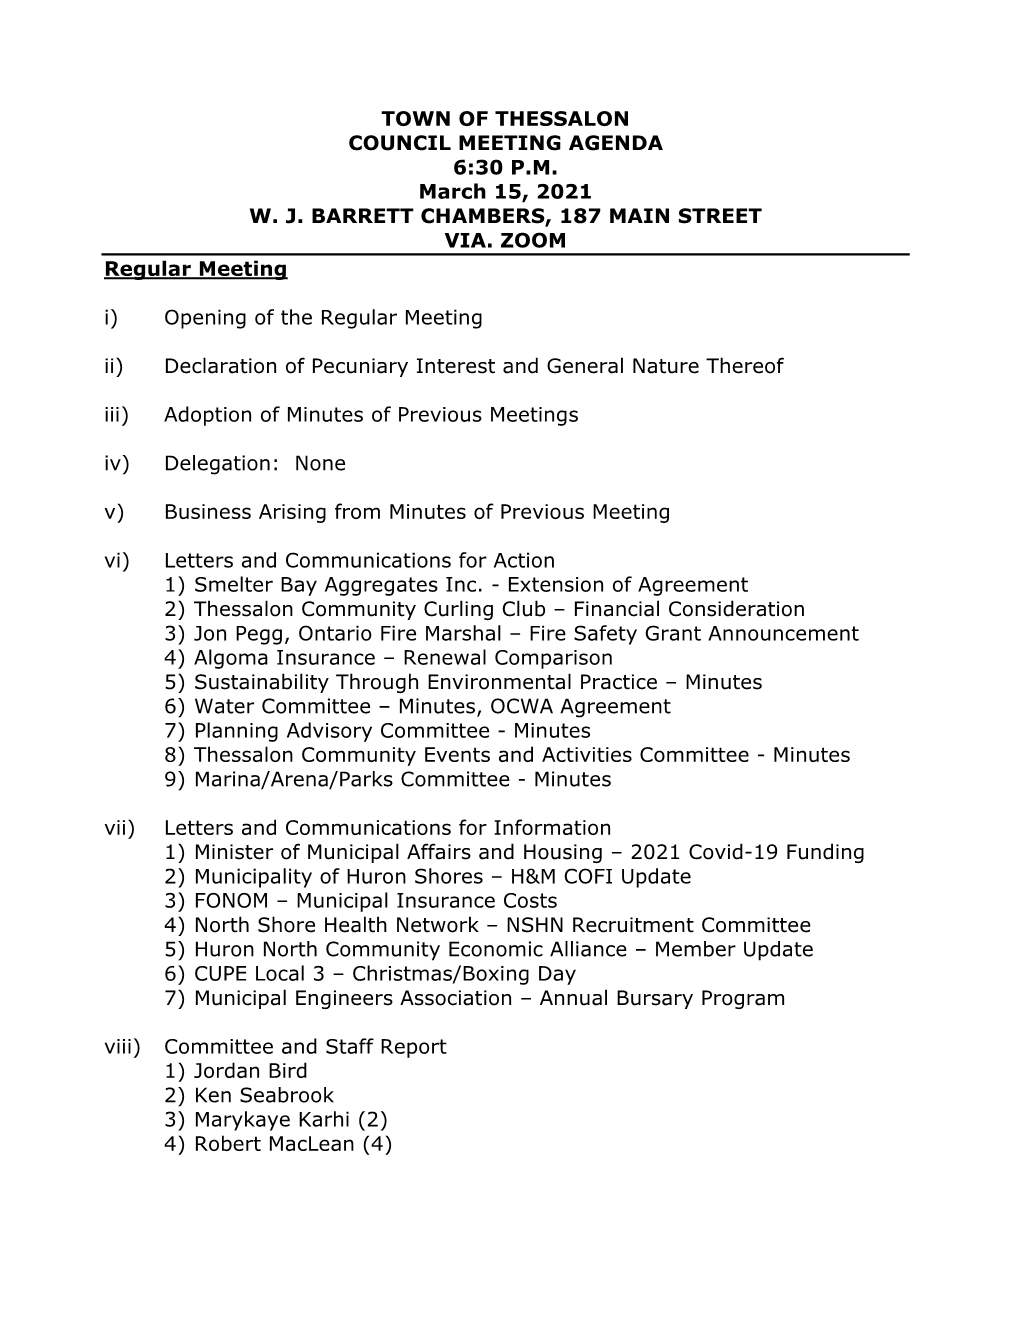 March 15, 2021 Council Meeting Agenda